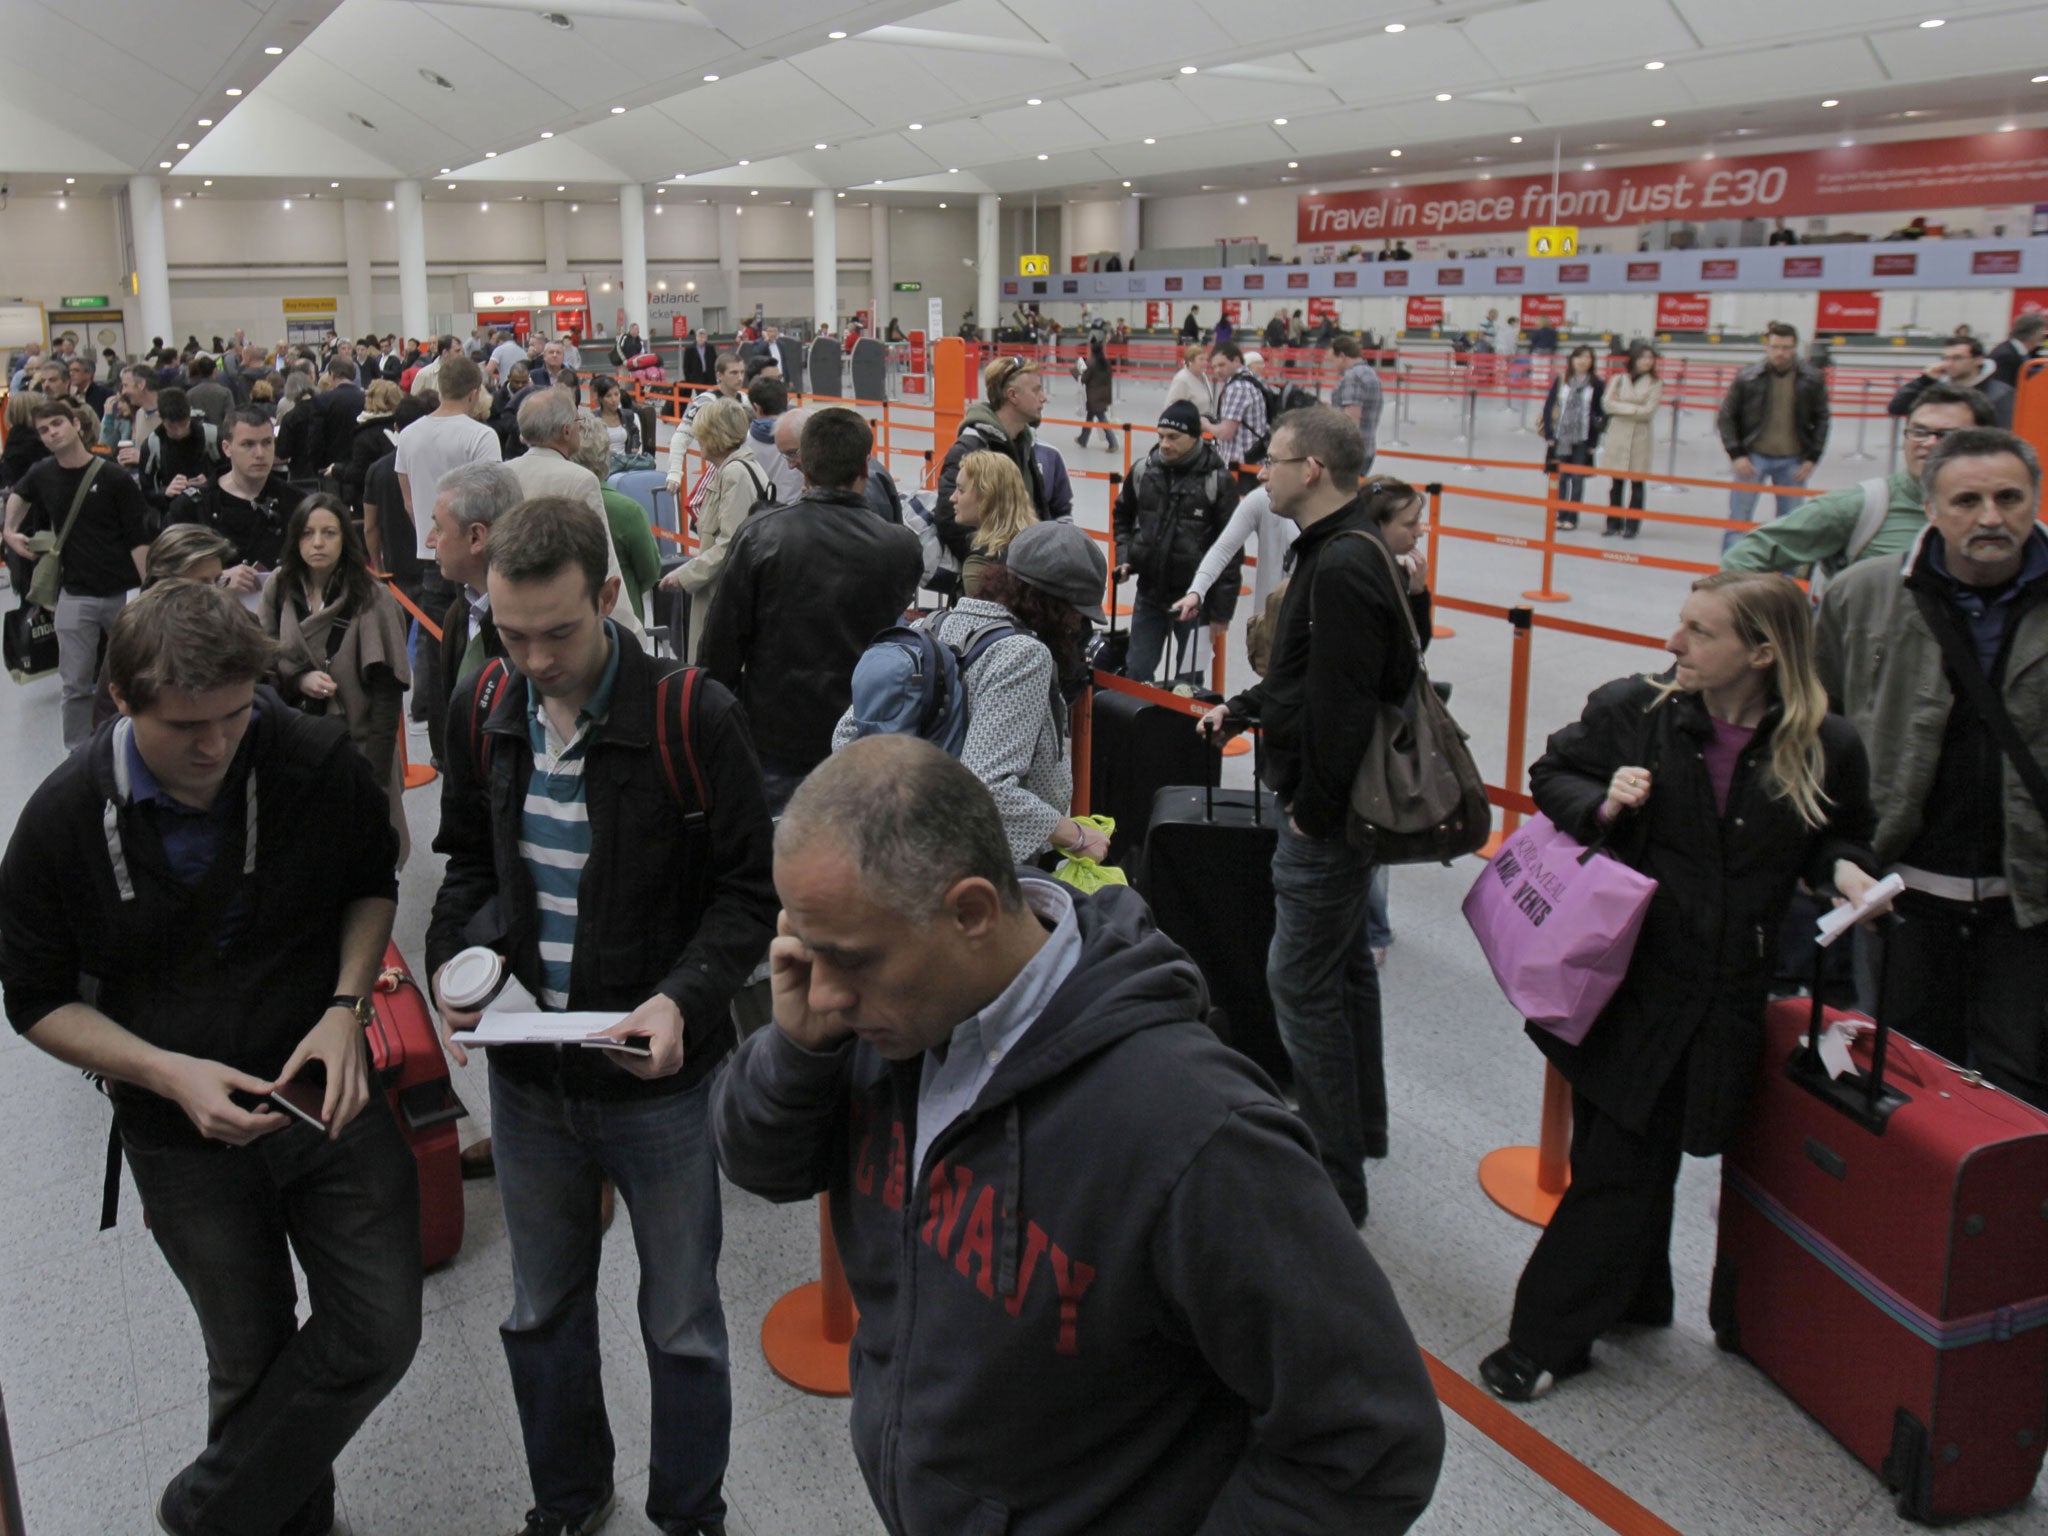 Flight disruption at Gatwick airport due to volcanic ash